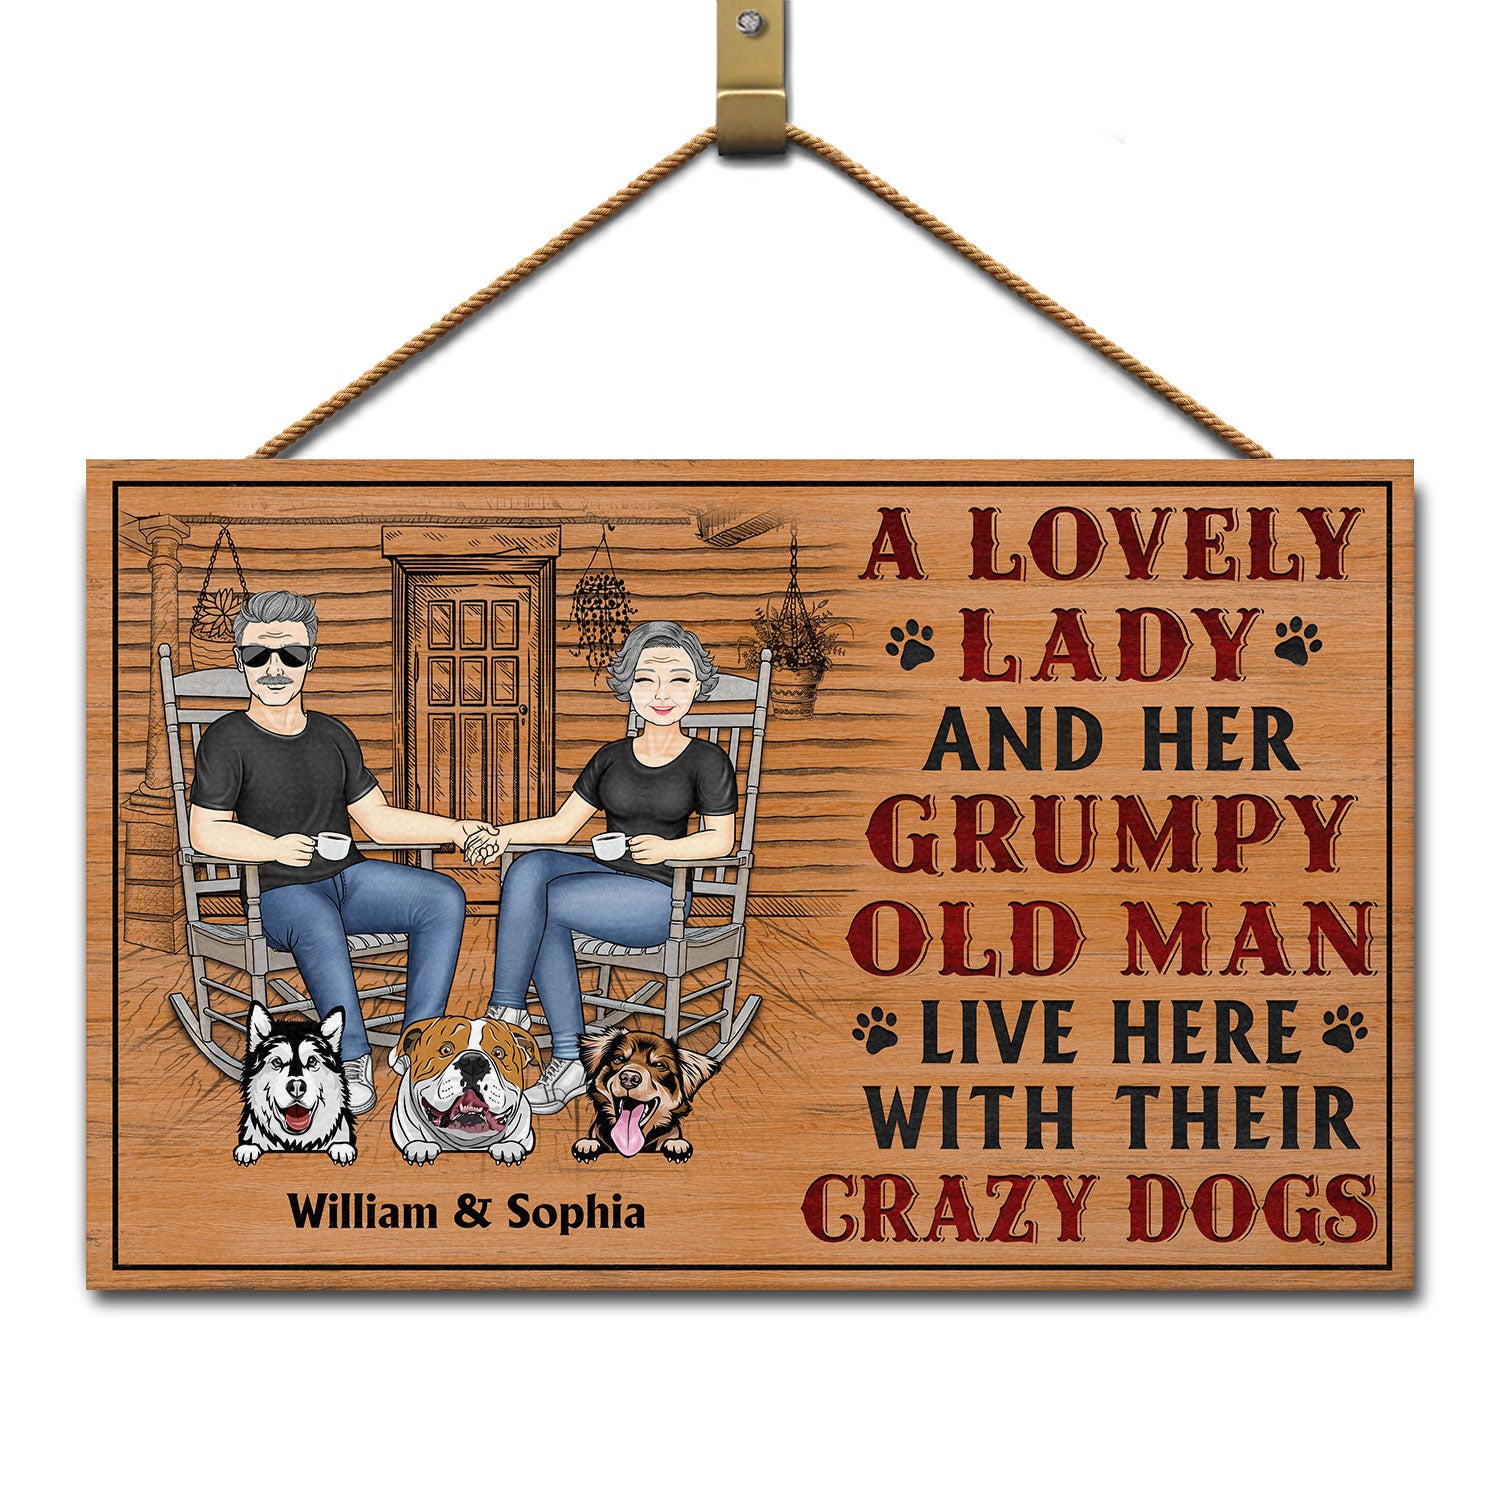 A Lovely Lady And A Grumpy Old Man Live Here With Their Crazy Dogs - Outdoor, Home Decor Gift For Family, Couple, Pet Lovers - Personalized Custom Wood Rectangle Sign